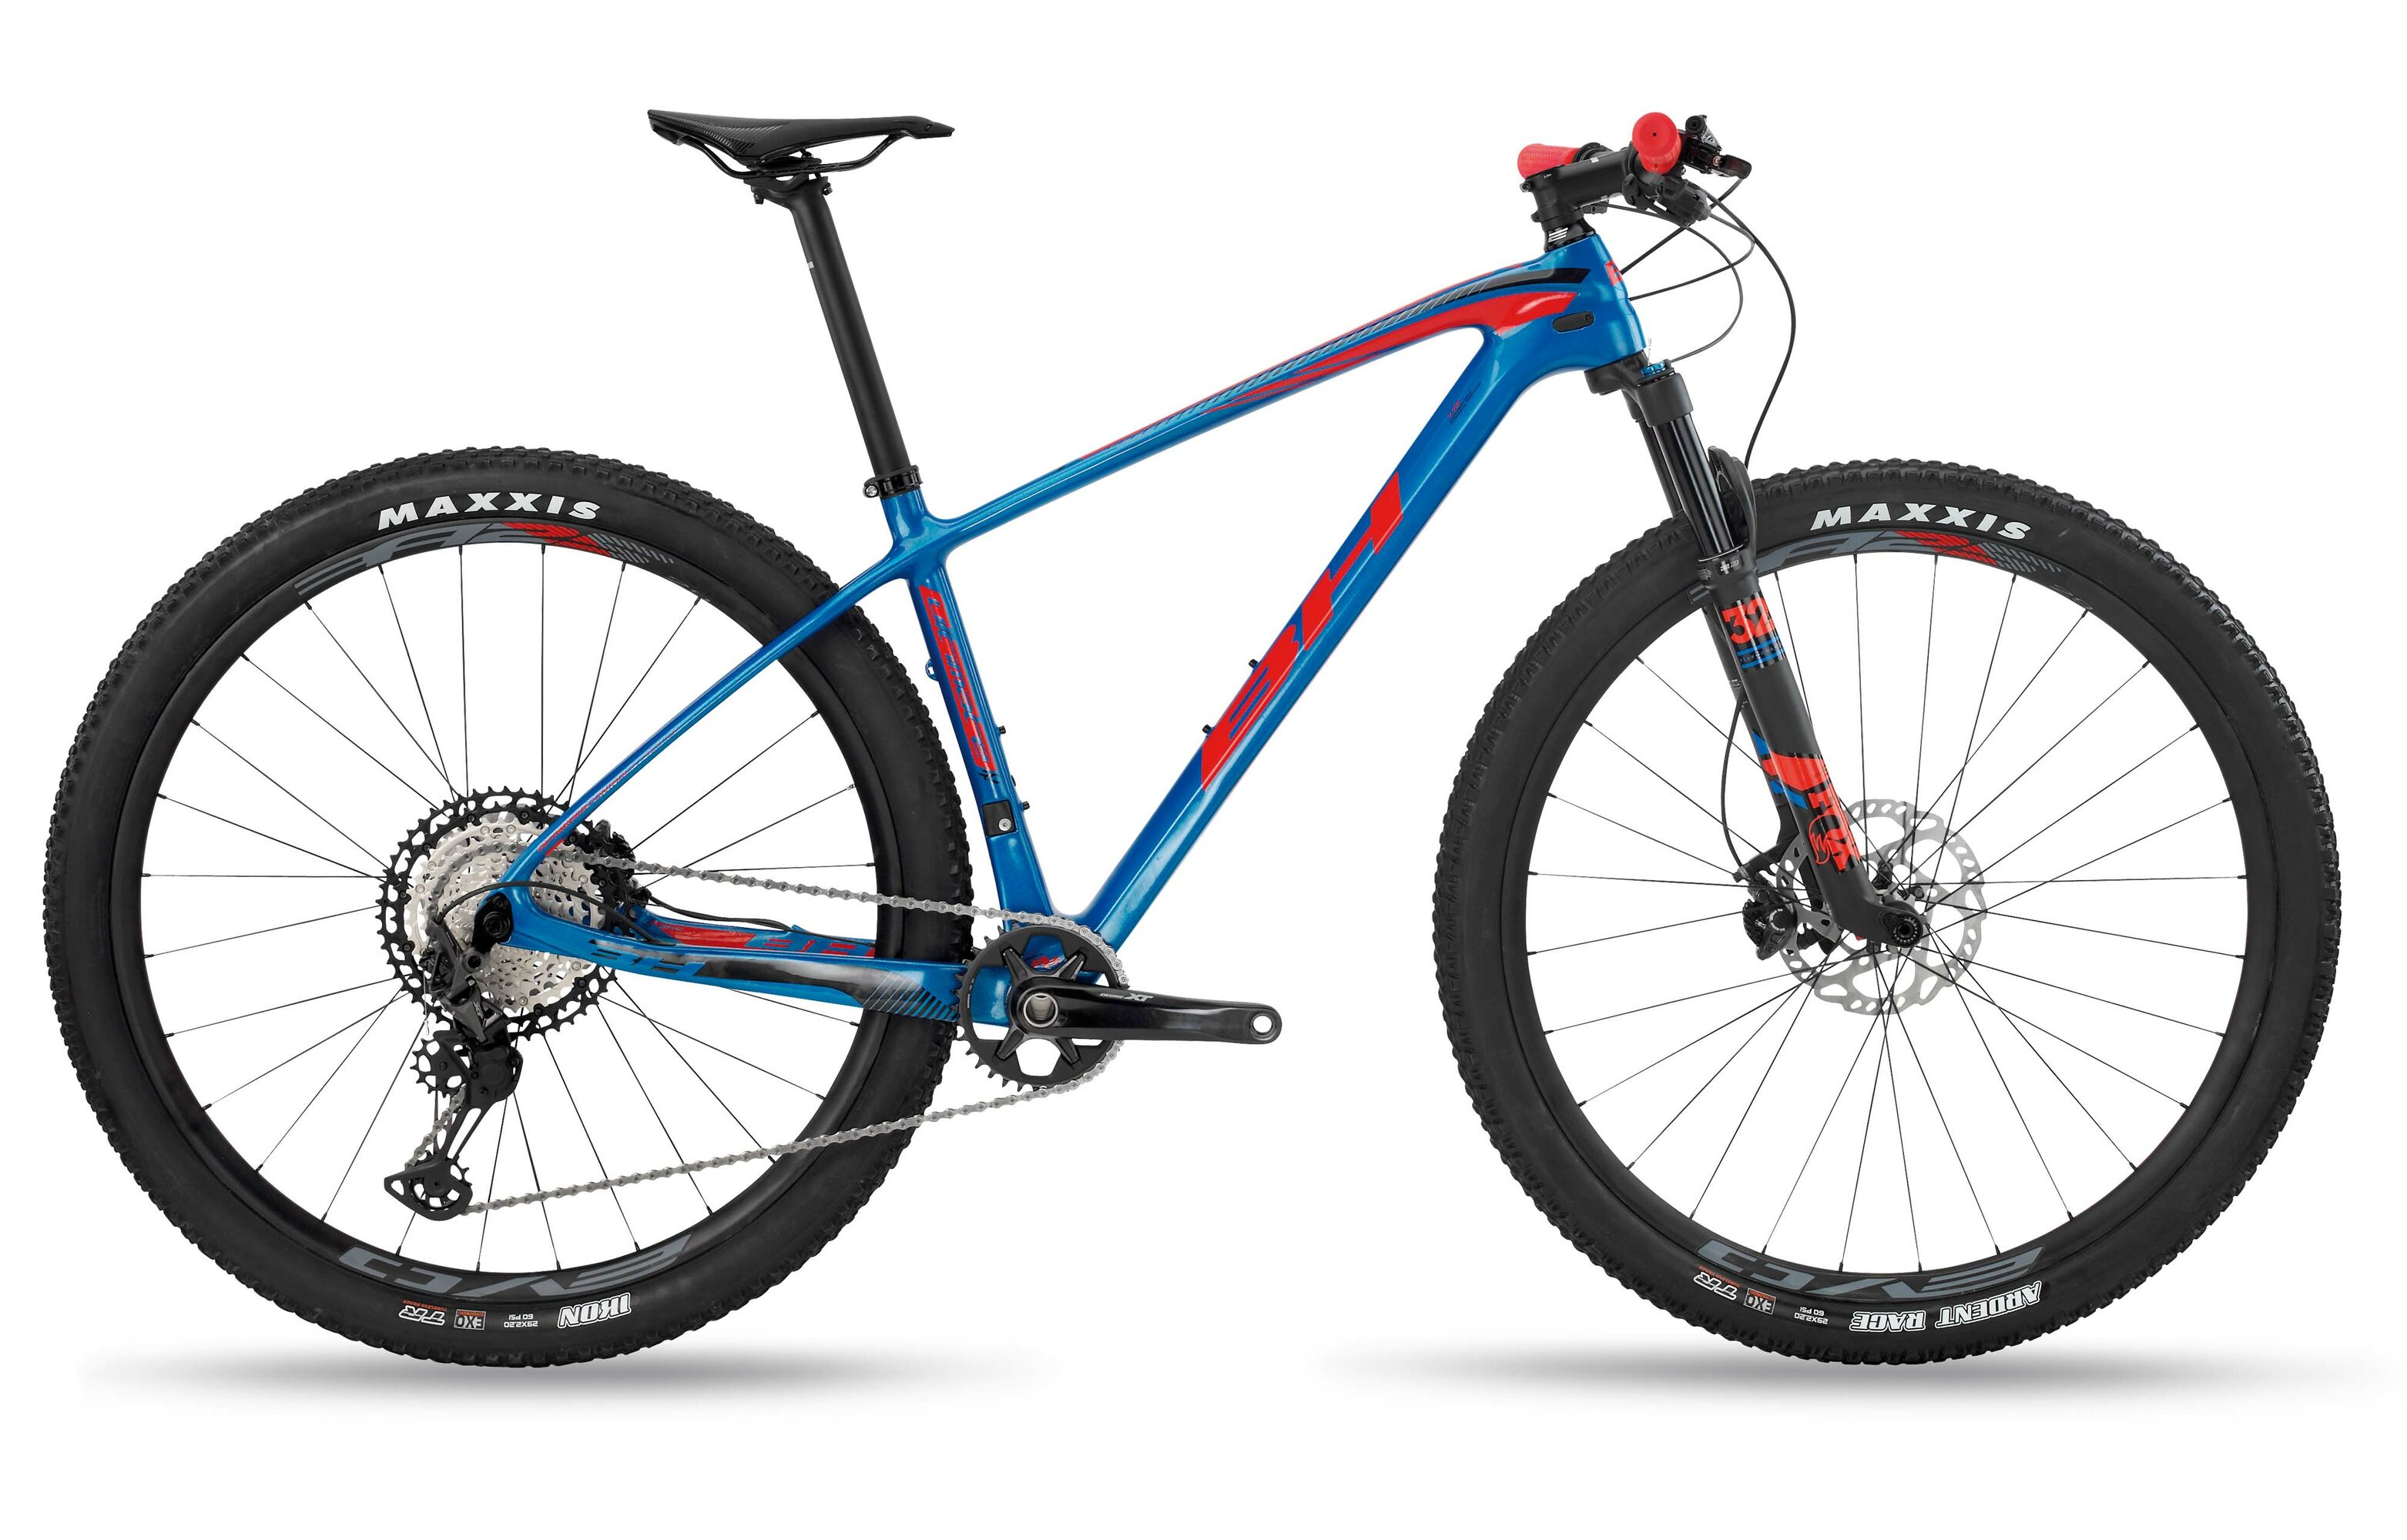 ULTIMATE RC 7.5 - BH Bikes